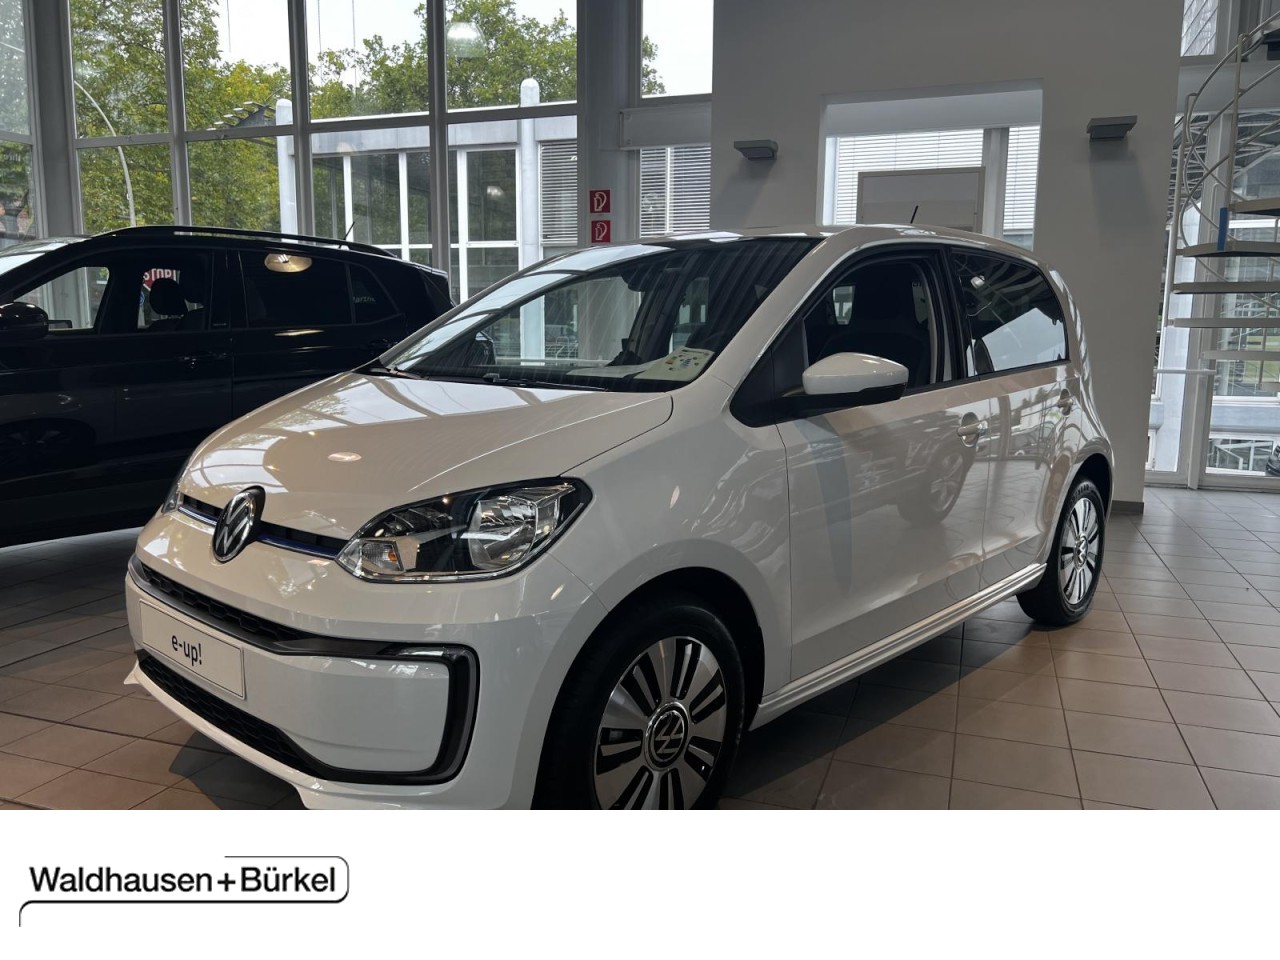 Volkswagen up 2.3 e-up Edition 61kW (83PS) 3kWh